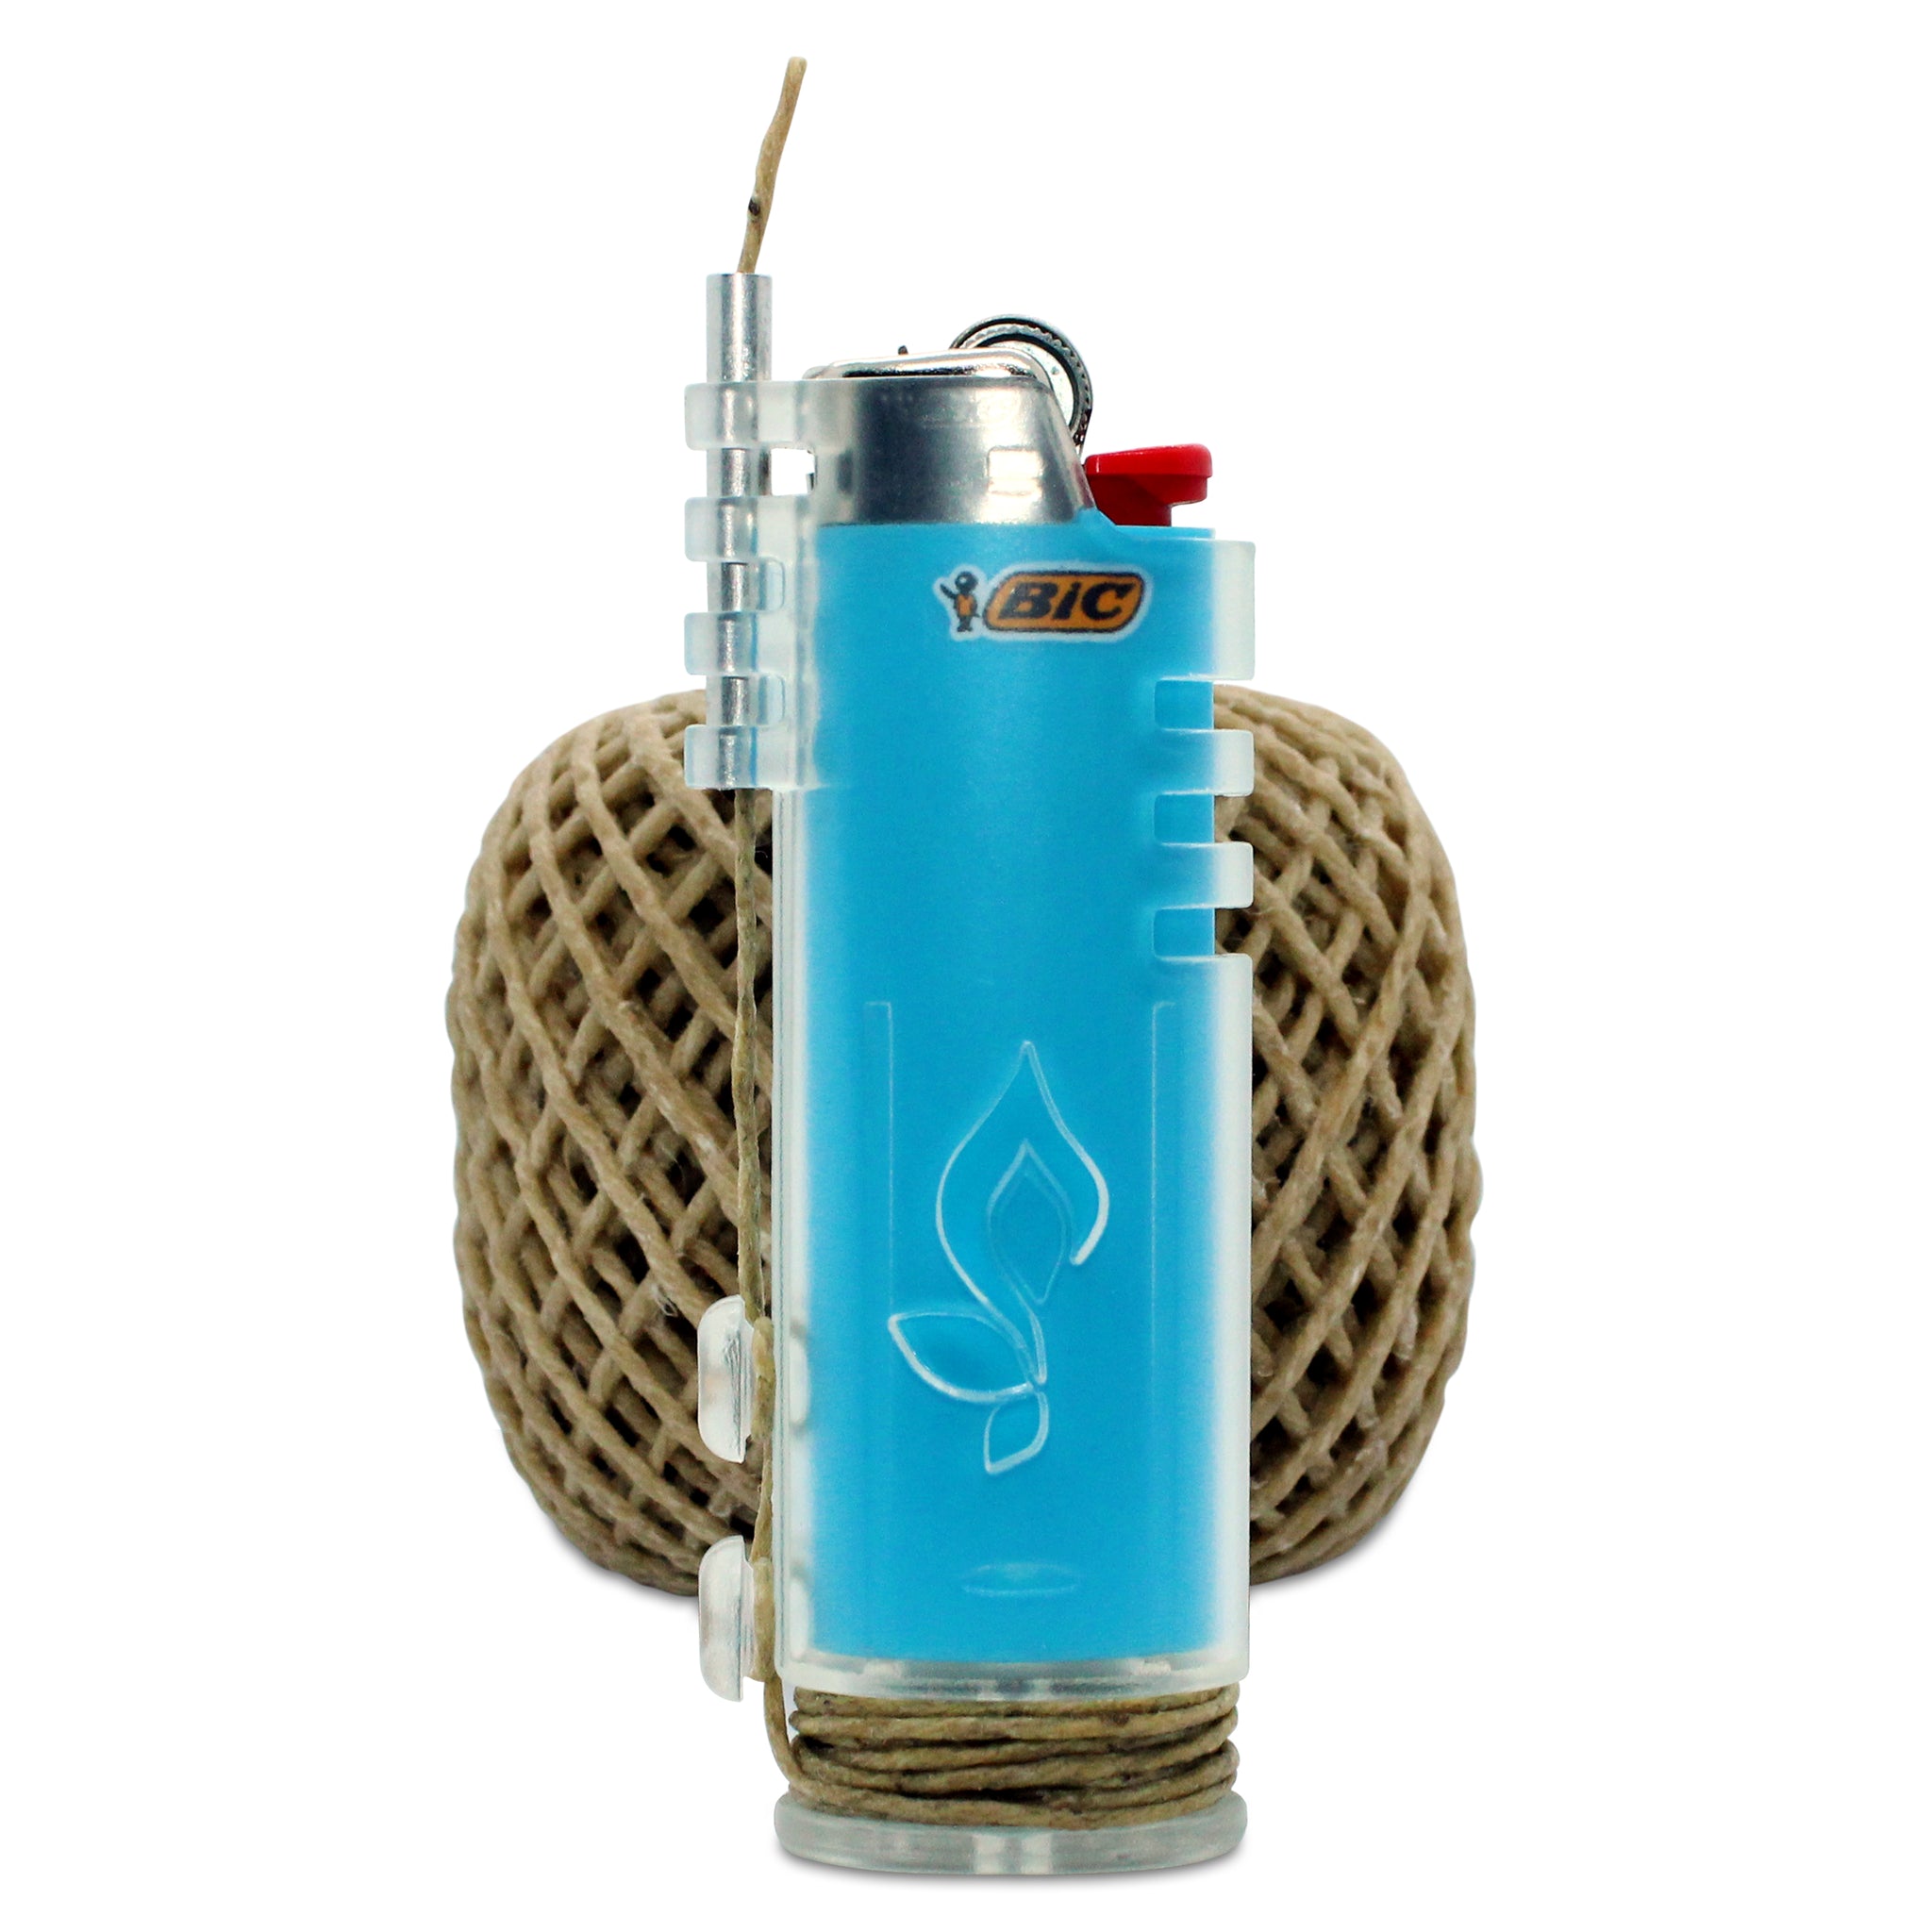 Earth Hemp Wick Lighter Case Fits Standard Lighters Easy to Use Hemp Feeder  for Slower & More Natural Flame -  Hong Kong